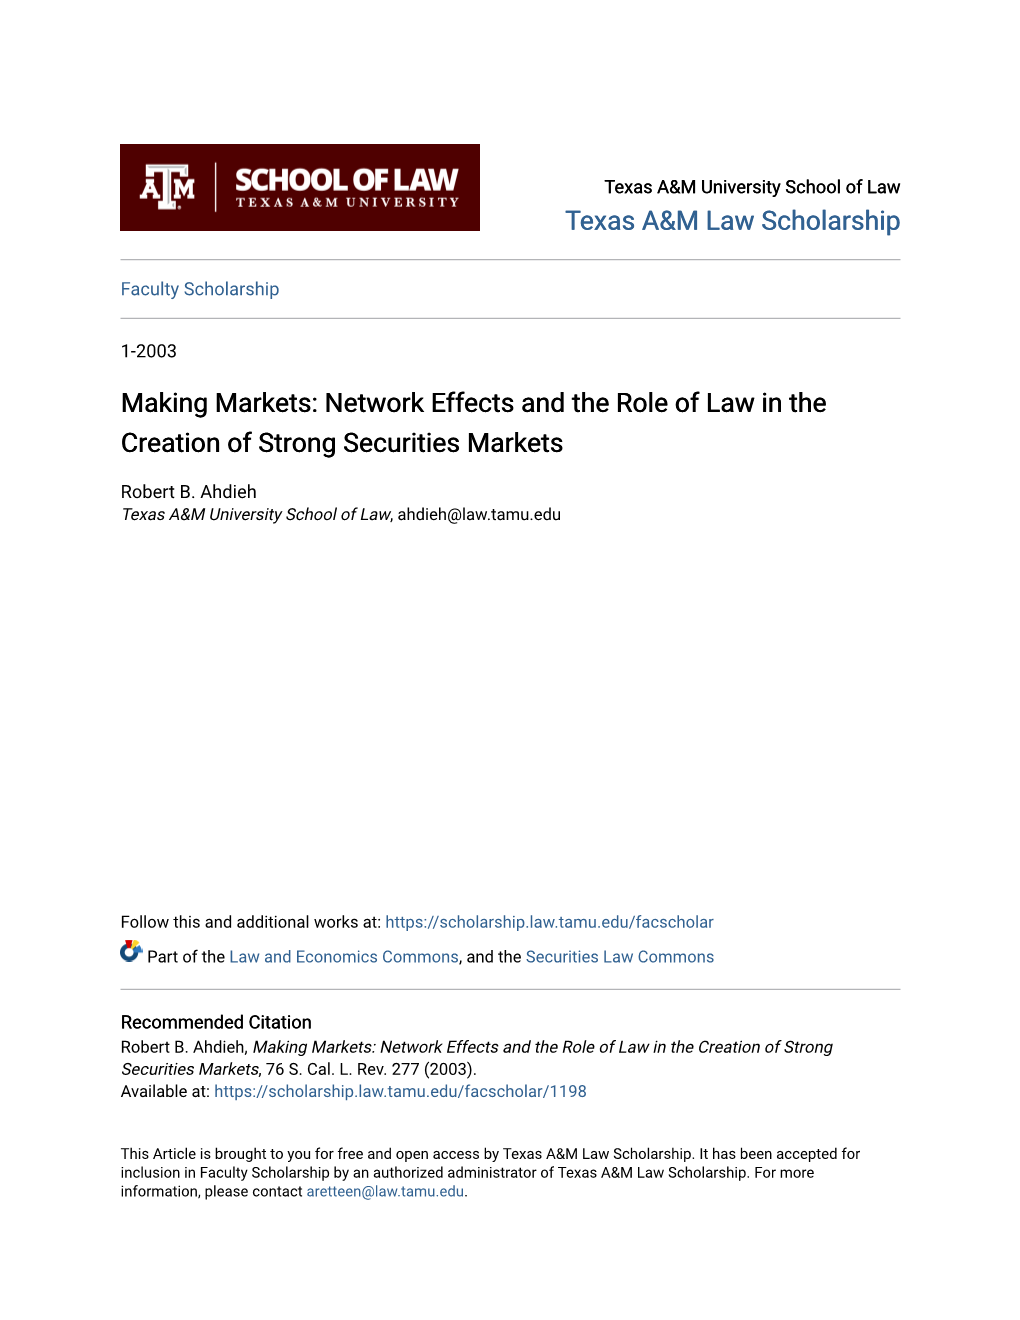 Making Markets: Network Effects and the Role of Law in the Creation of Strong Securities Markets